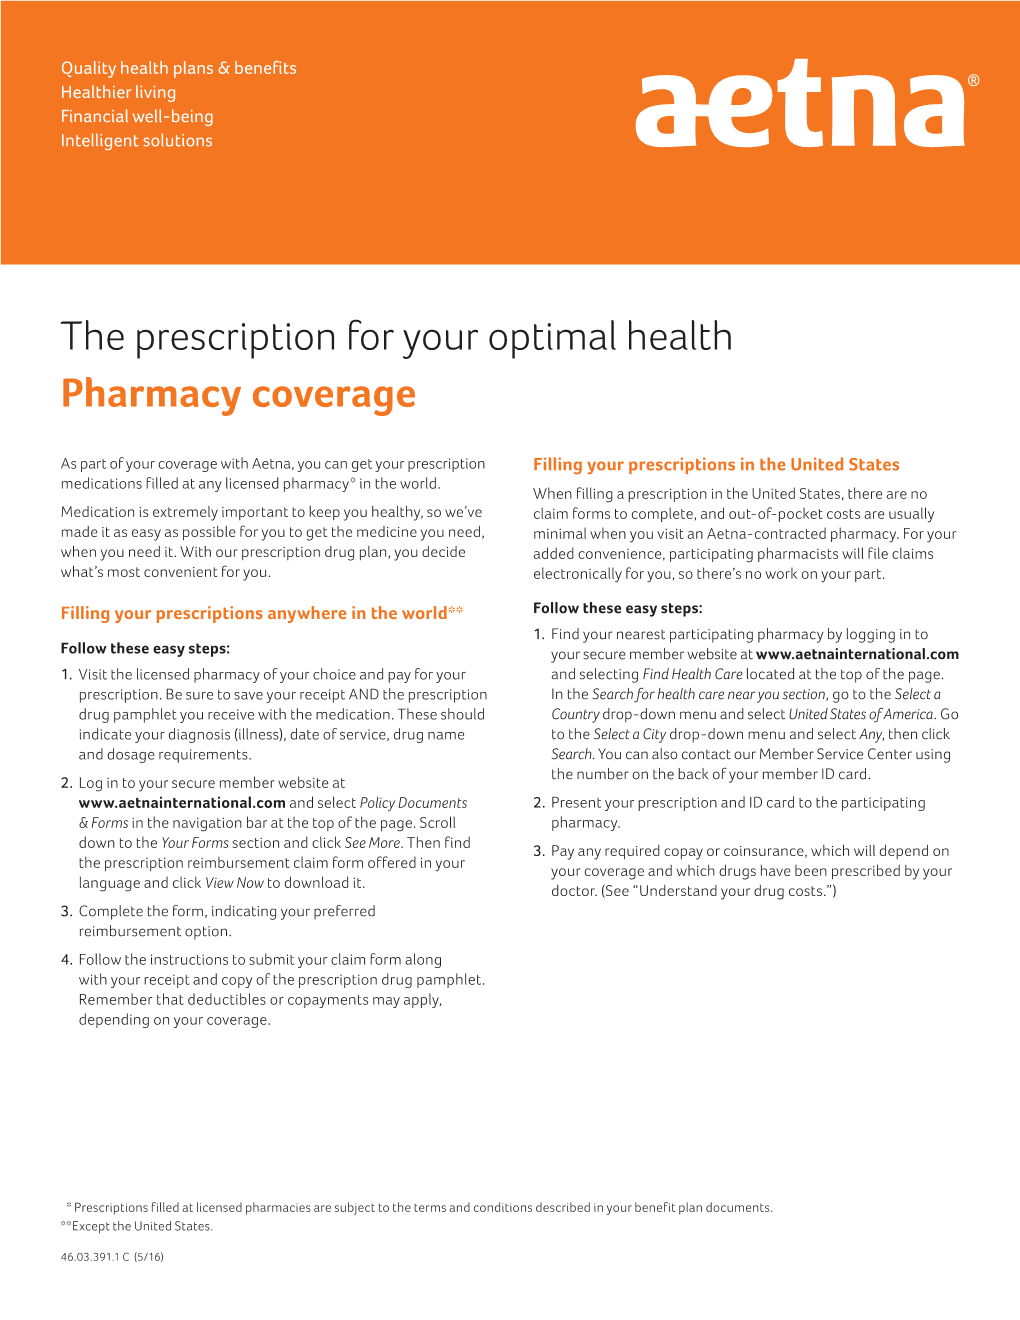 The Prescription for Your Optimal Health Pharmacy Coverage